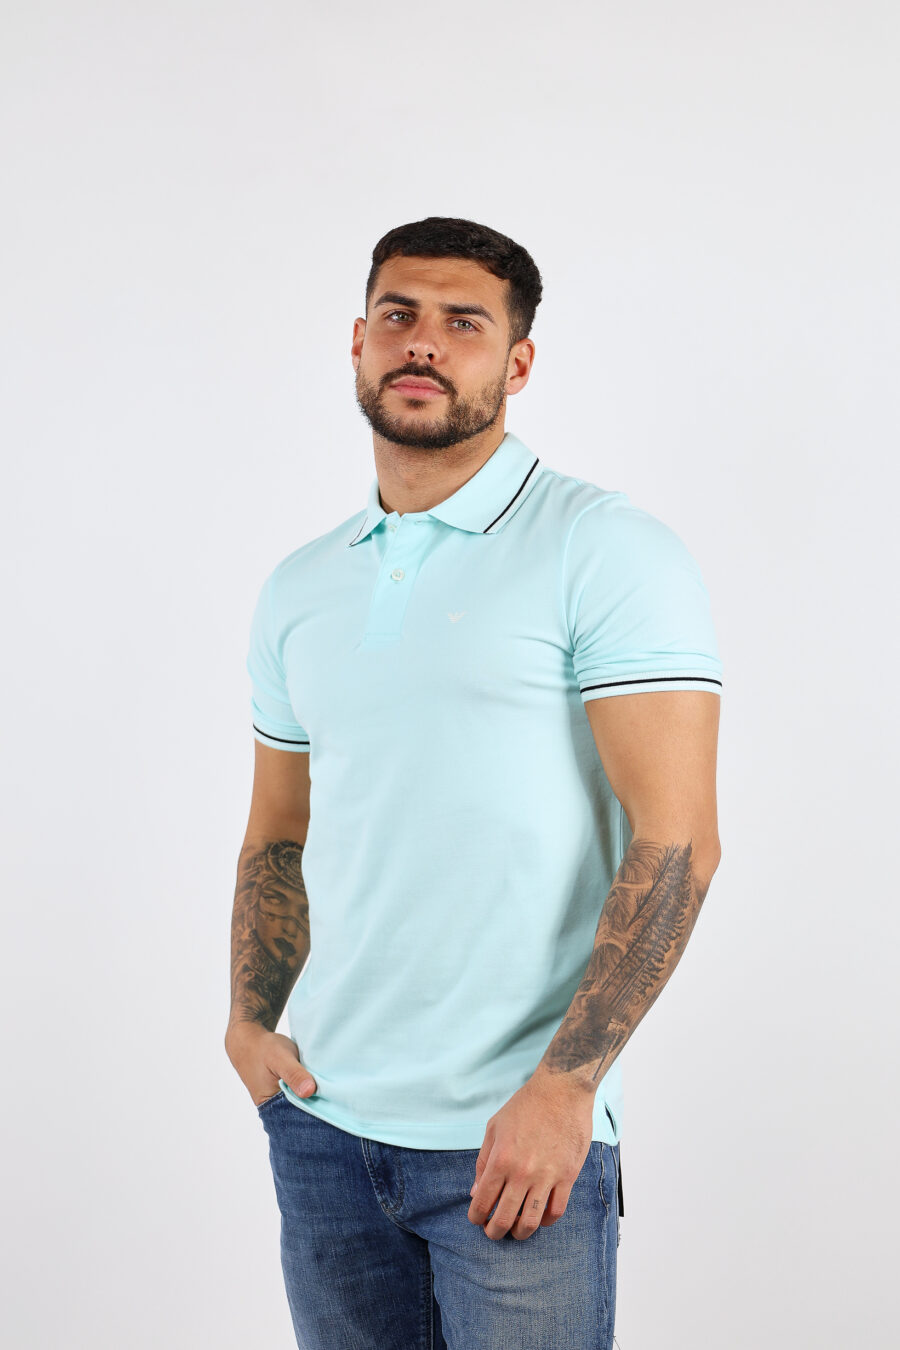 Light blue knitted polo shirt with striped collar and mini eagle logo - BLS Fashion 37